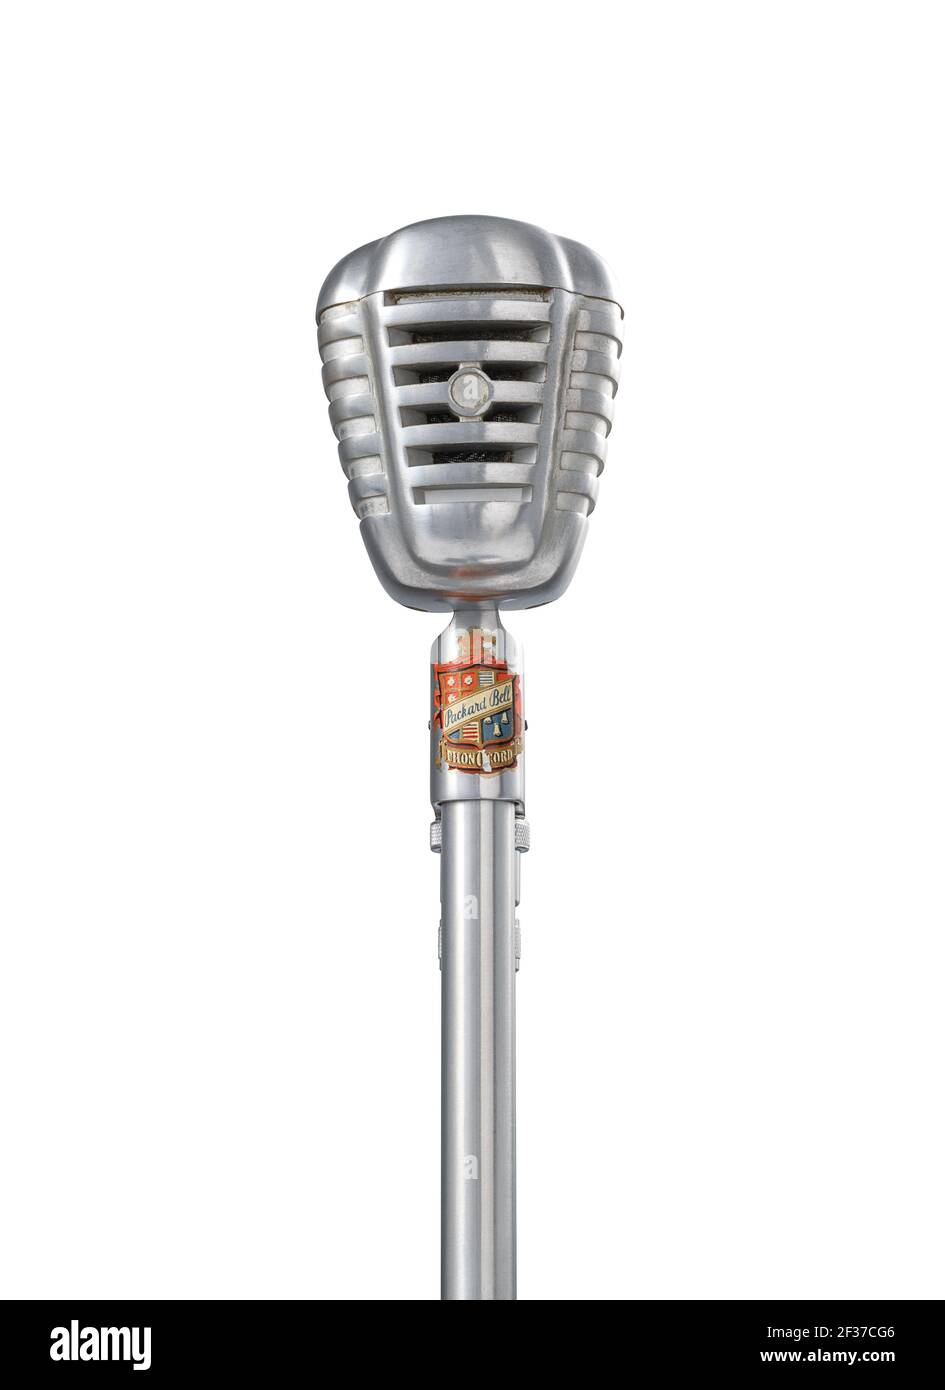 Front view of a 1940s microphone Stock Photo - Alamy